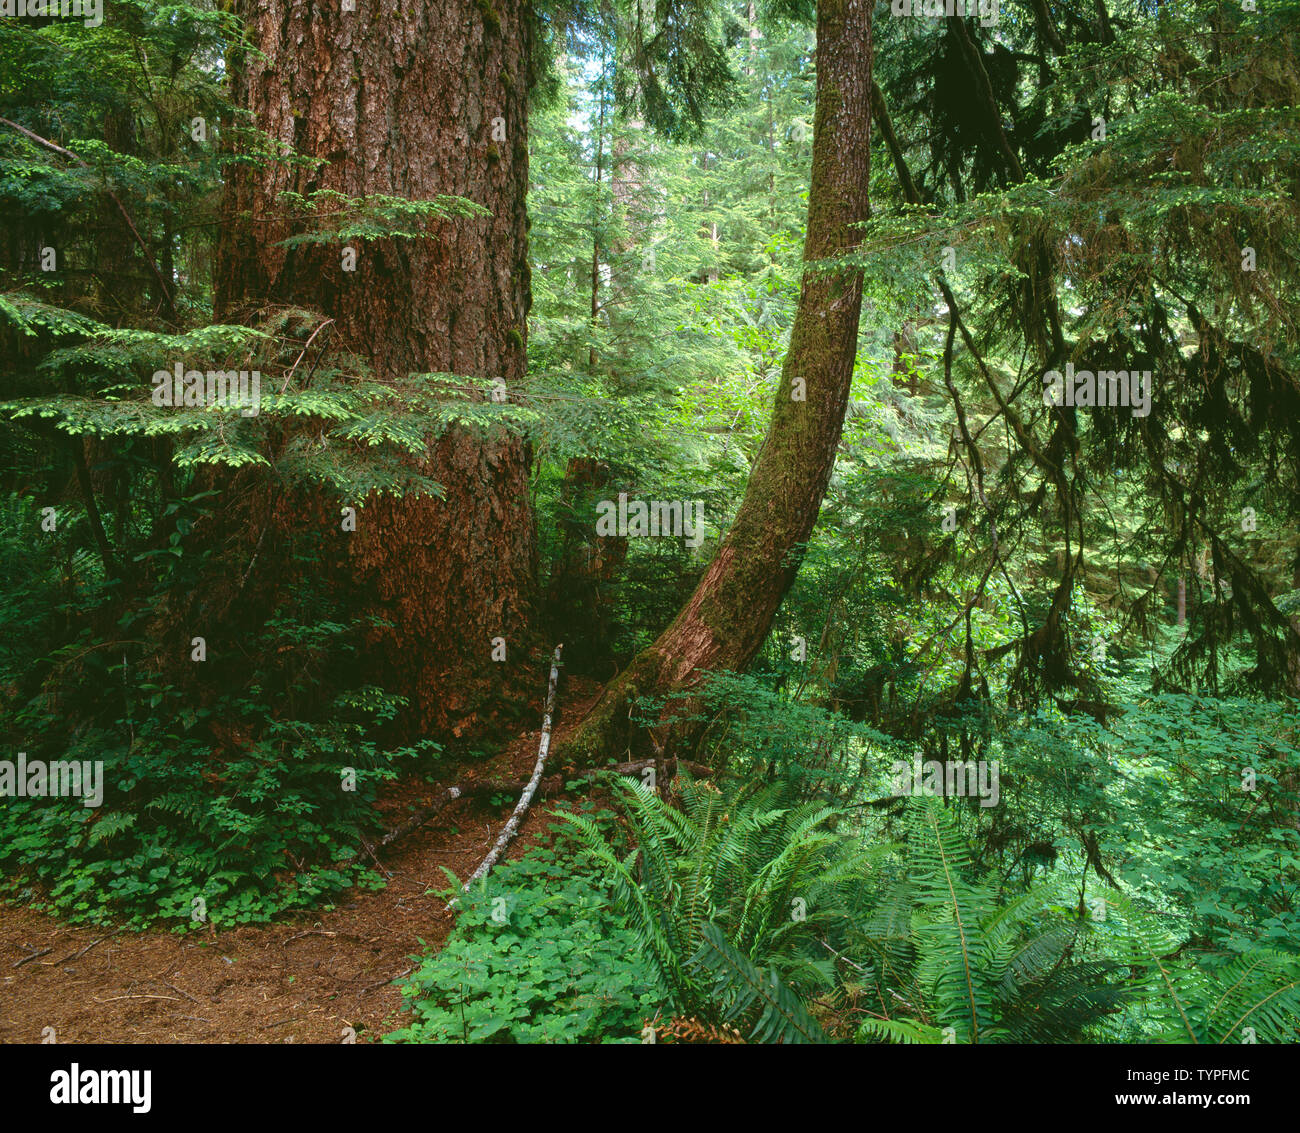 USA, Washington, Olympic National Park, Large Douglas fir and smaller western hemlock in temperate rain forest; Quinault Valley. Stock Photo